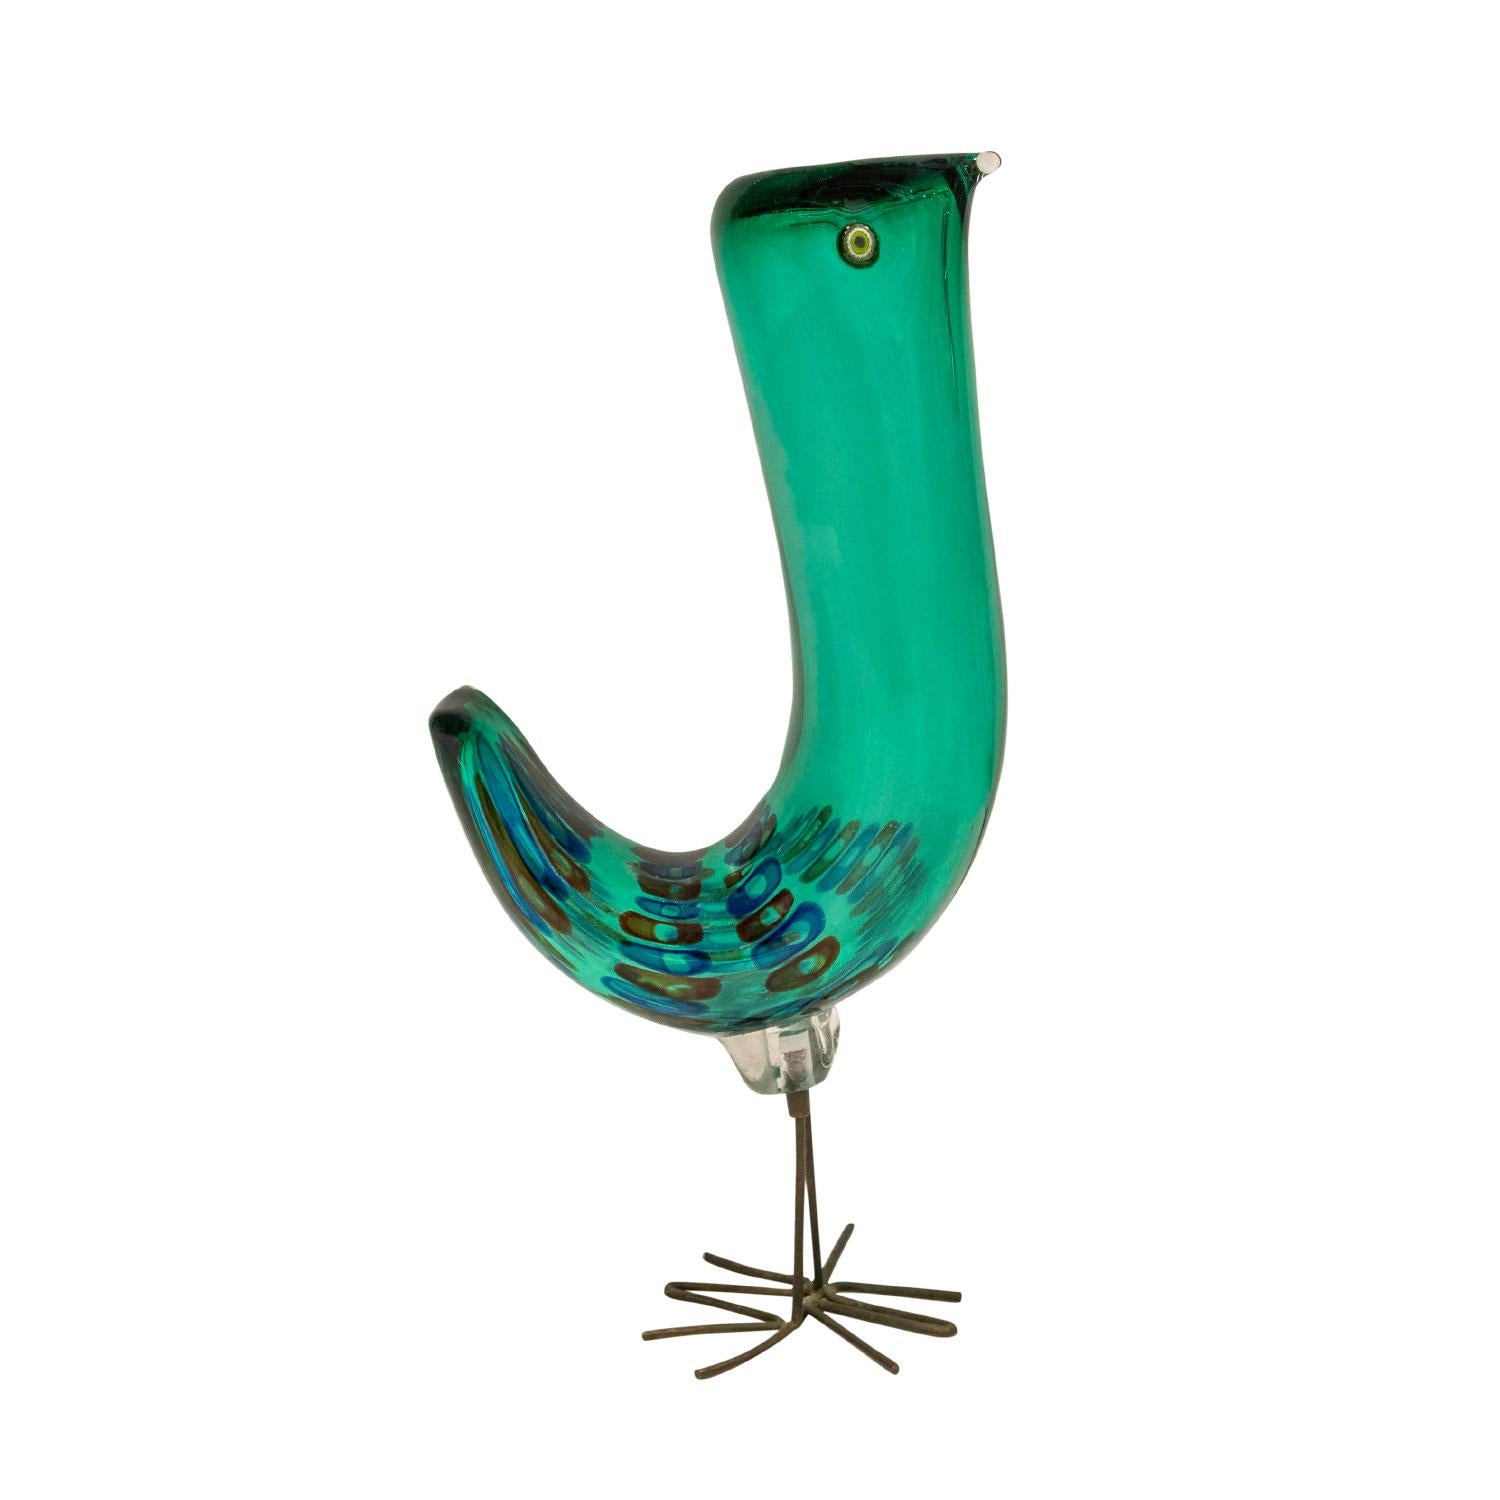 Rare hand blown glass bird, Pulcini Series, green with red and blue murrhines with copper feet by Alessandro Pianon for Vistosi, Murano Italy, ca 1963. Pulcini means chicks (baby chickens) in Italian. These birds are both delightful and serious